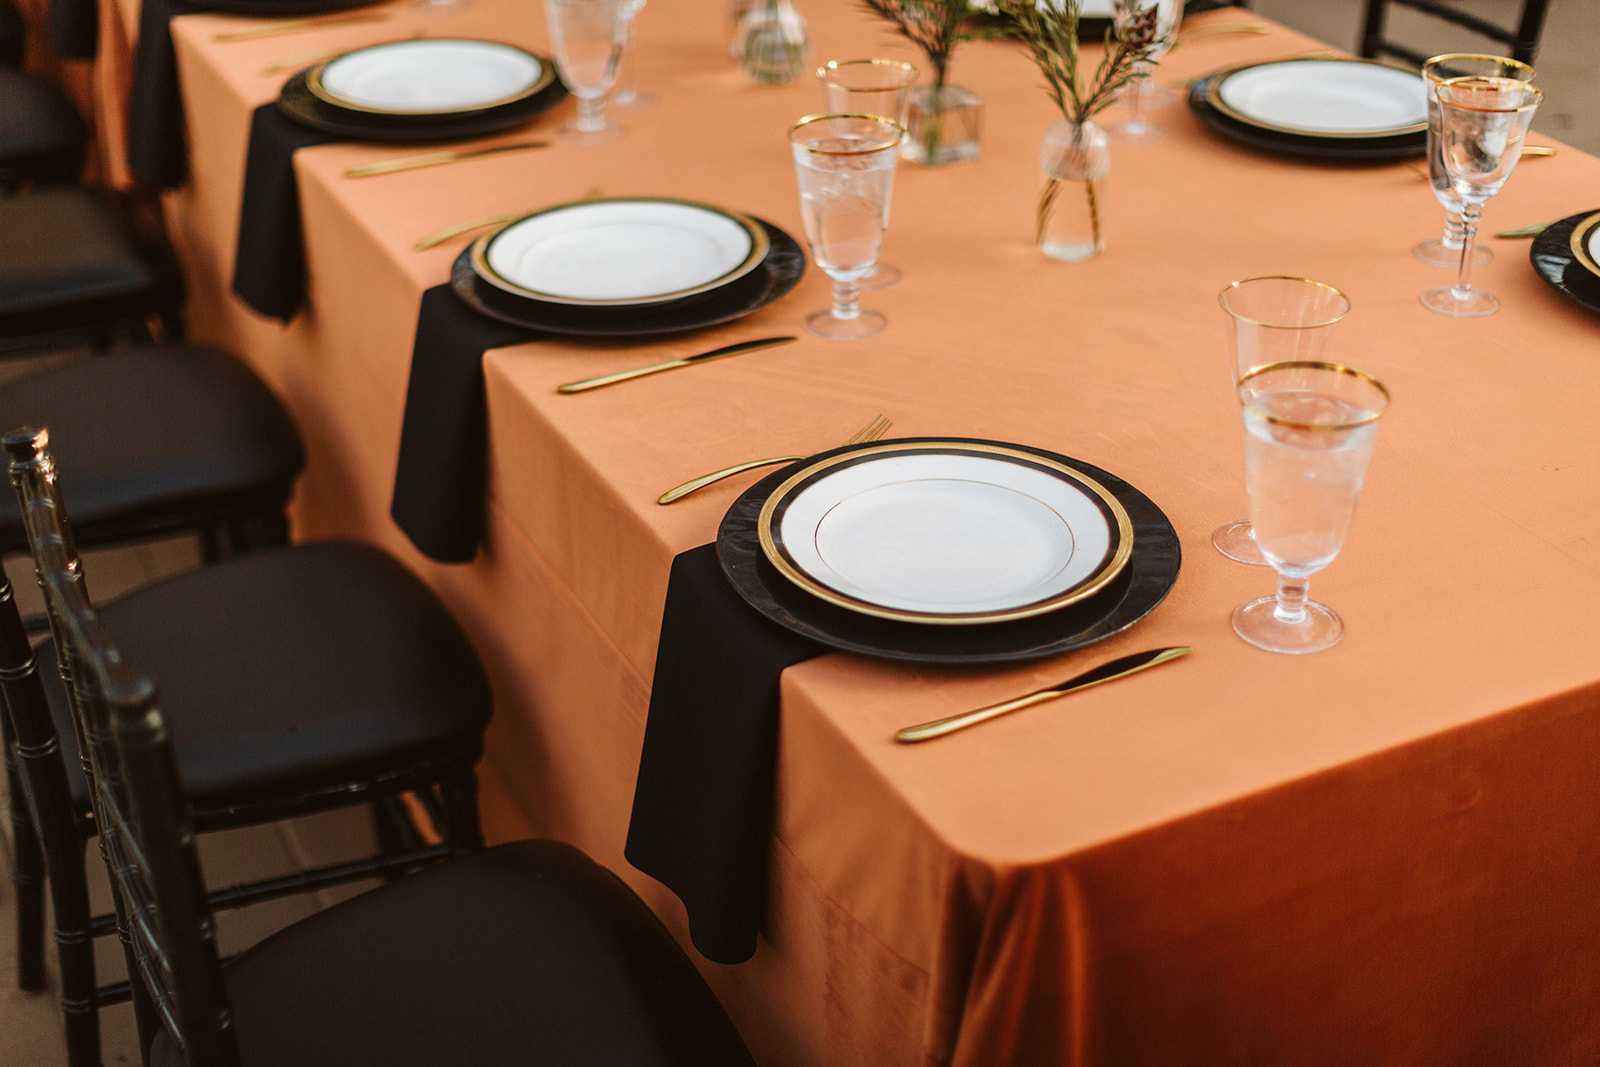 Close up of the gold silverware and gold rimmed plates with gold rimmed glasses sit on an orange cloth table